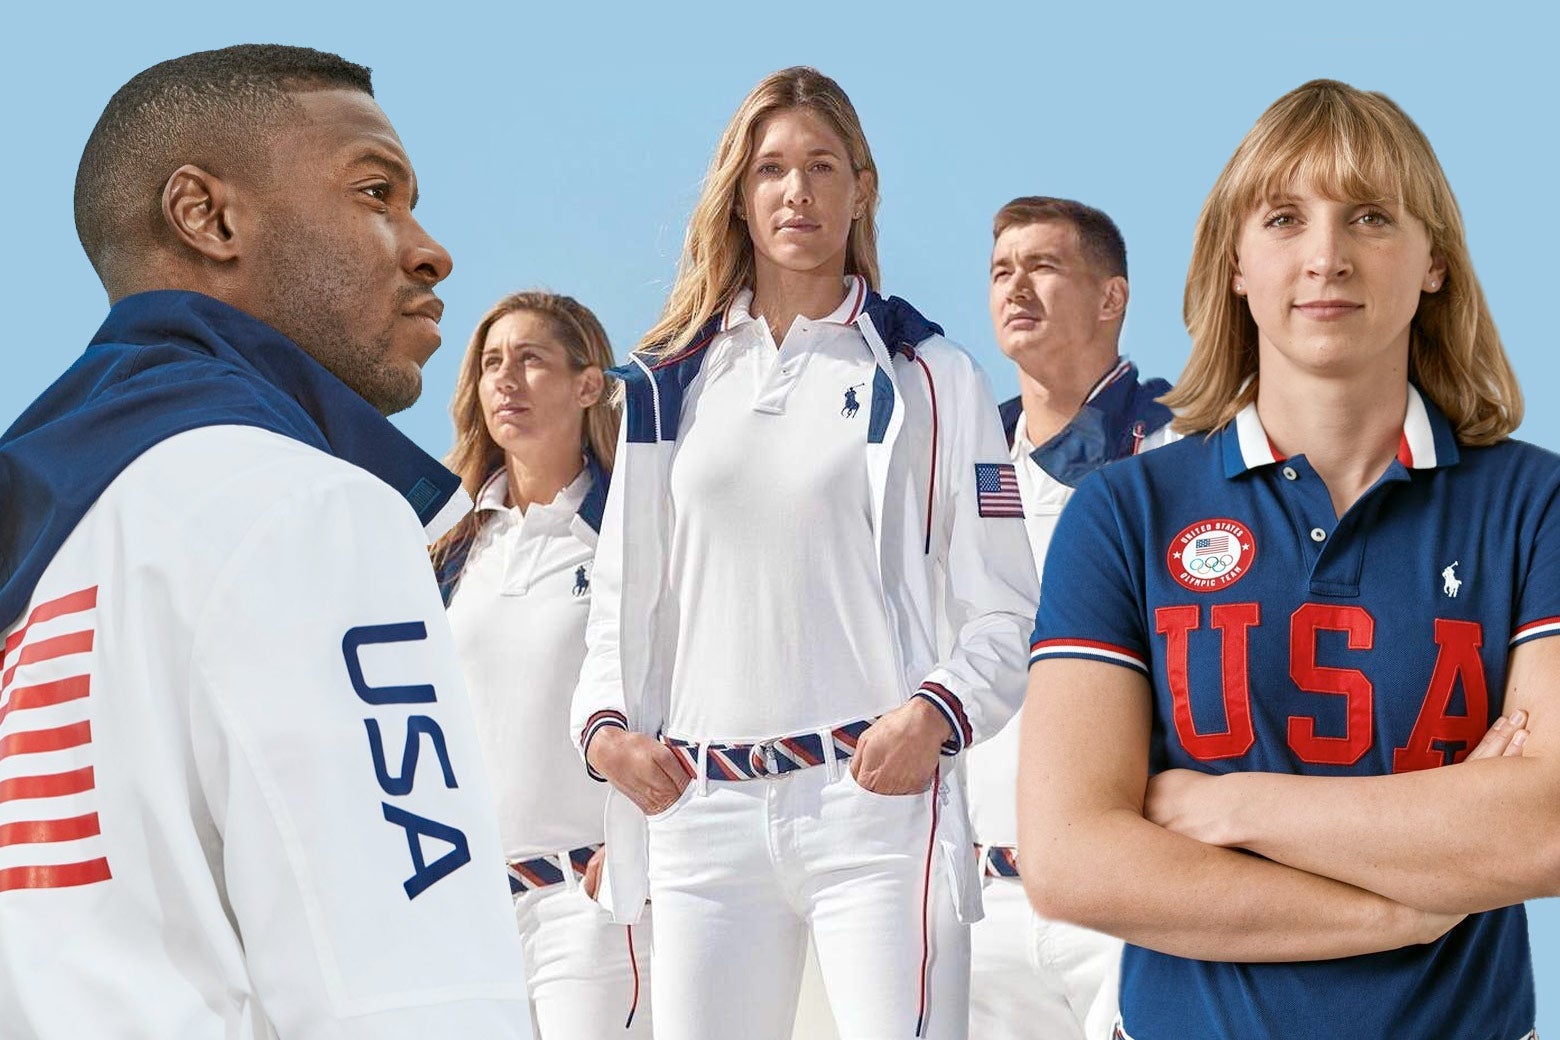 Five Olympic athletes modeling the Ralph Lauren outfits of windbreakers, polo shirts, and white jeans.